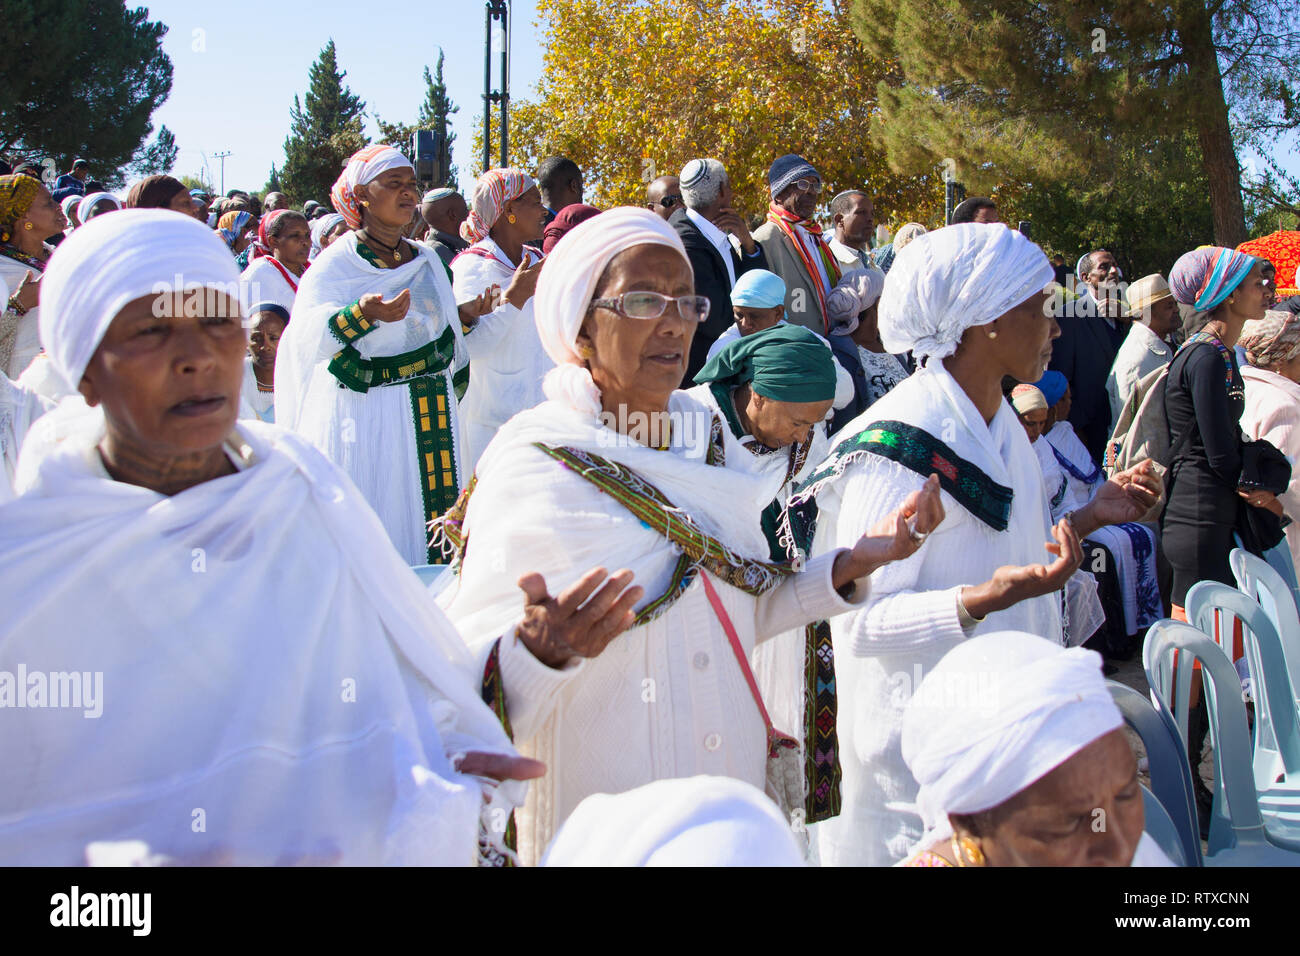 JERUSALEM - NOV 20, 2014: Ethiopian Jewish women pray at the Sigd, in Jerusalem, Israel. The Sigd is an annual holiday of the Ethiopian Jews Stock Photo